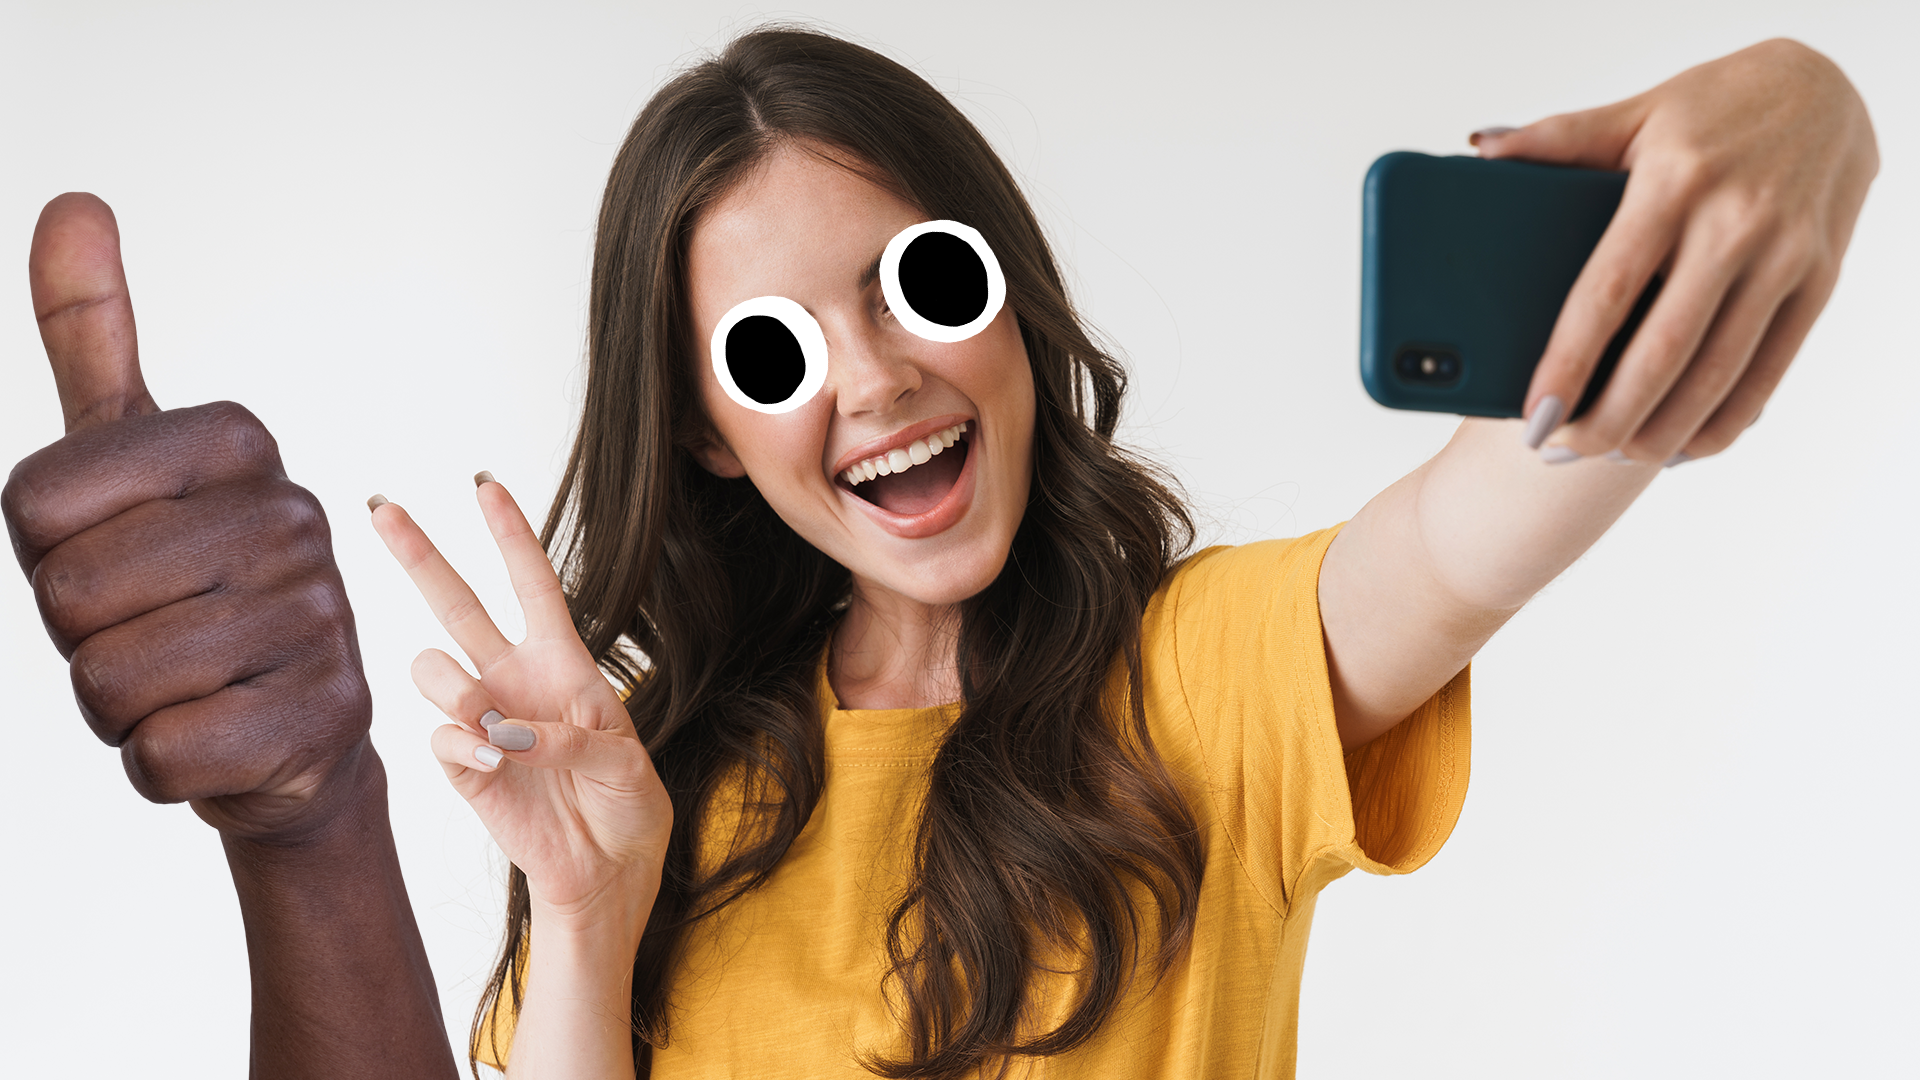 Woman taking selfie and a thumbs up